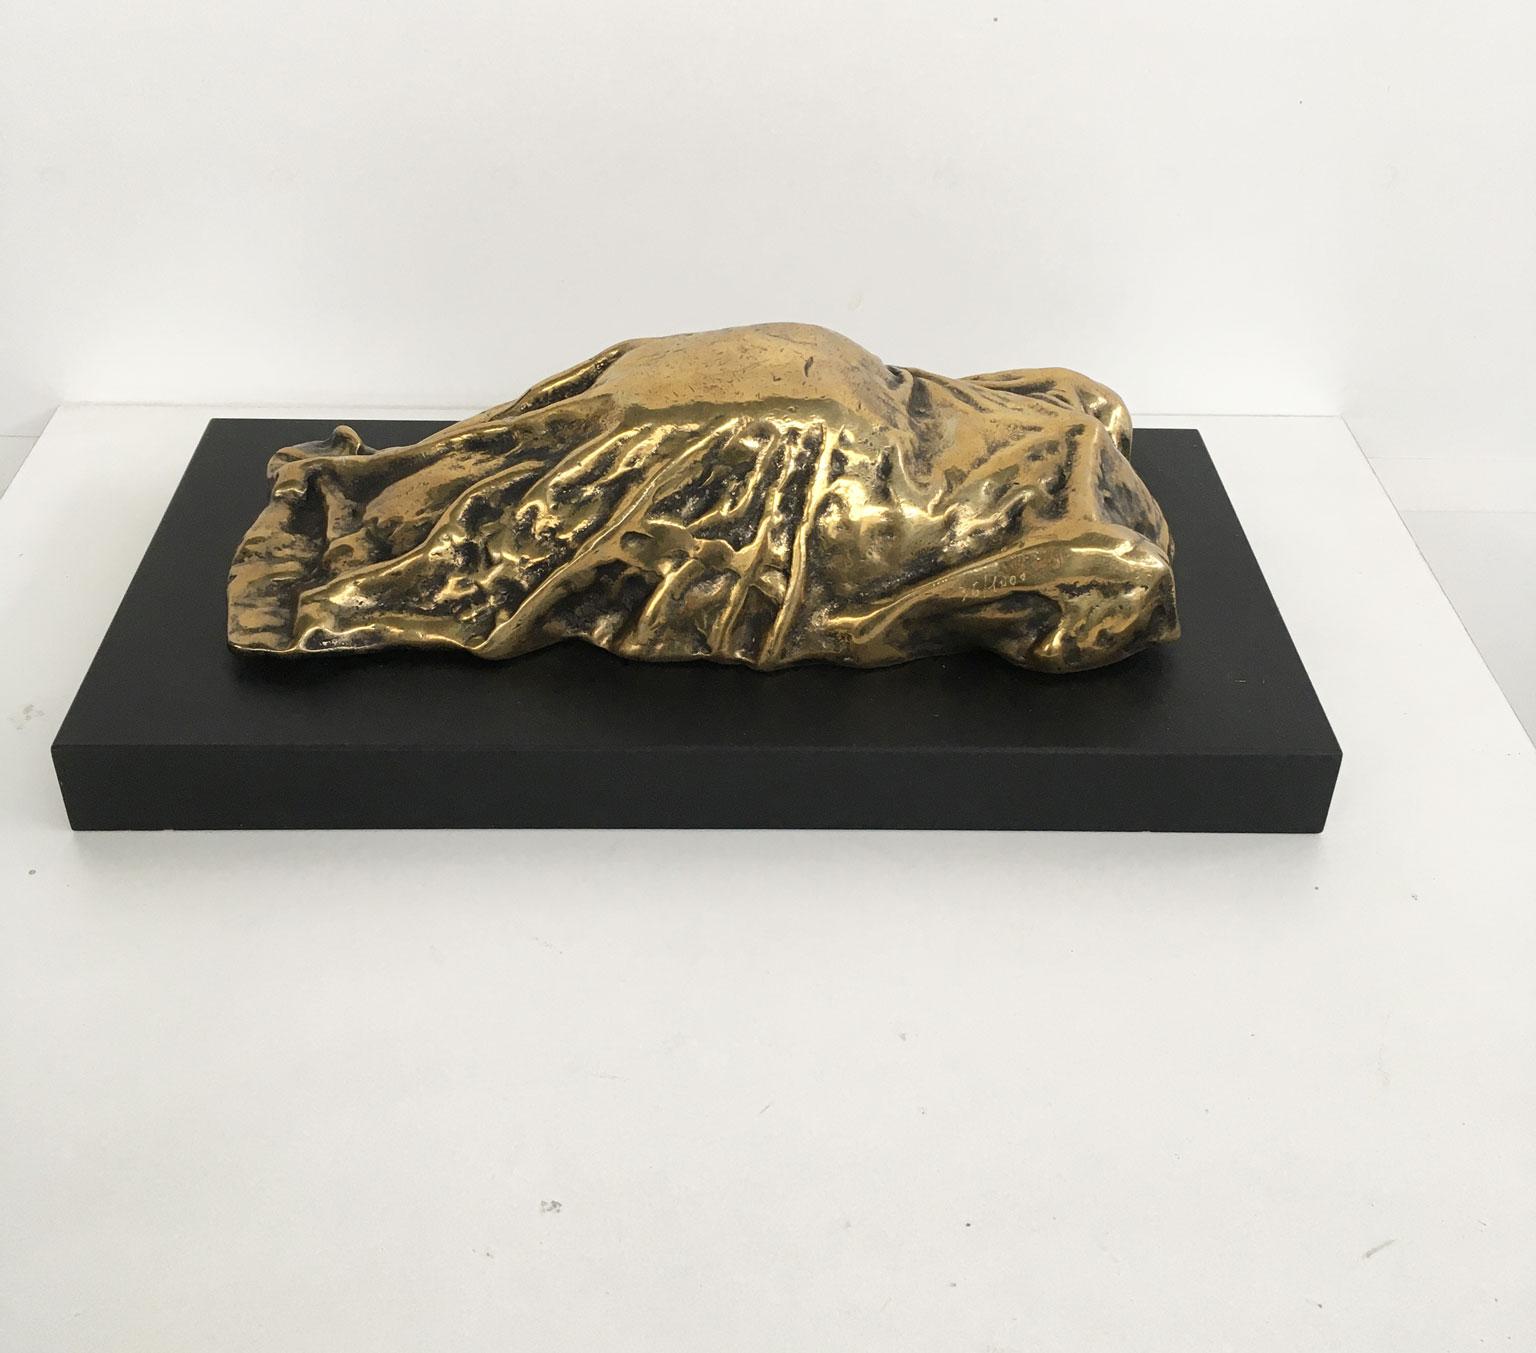 This intense and engaging abstract sculpture was create in 1980 by the Italian artist Furio Giovannacci.
This is a multiple of 1000 specimen, numbered and signed by the artist. The title is "Indianapolis".
The piece is a bronze sculpture on a black